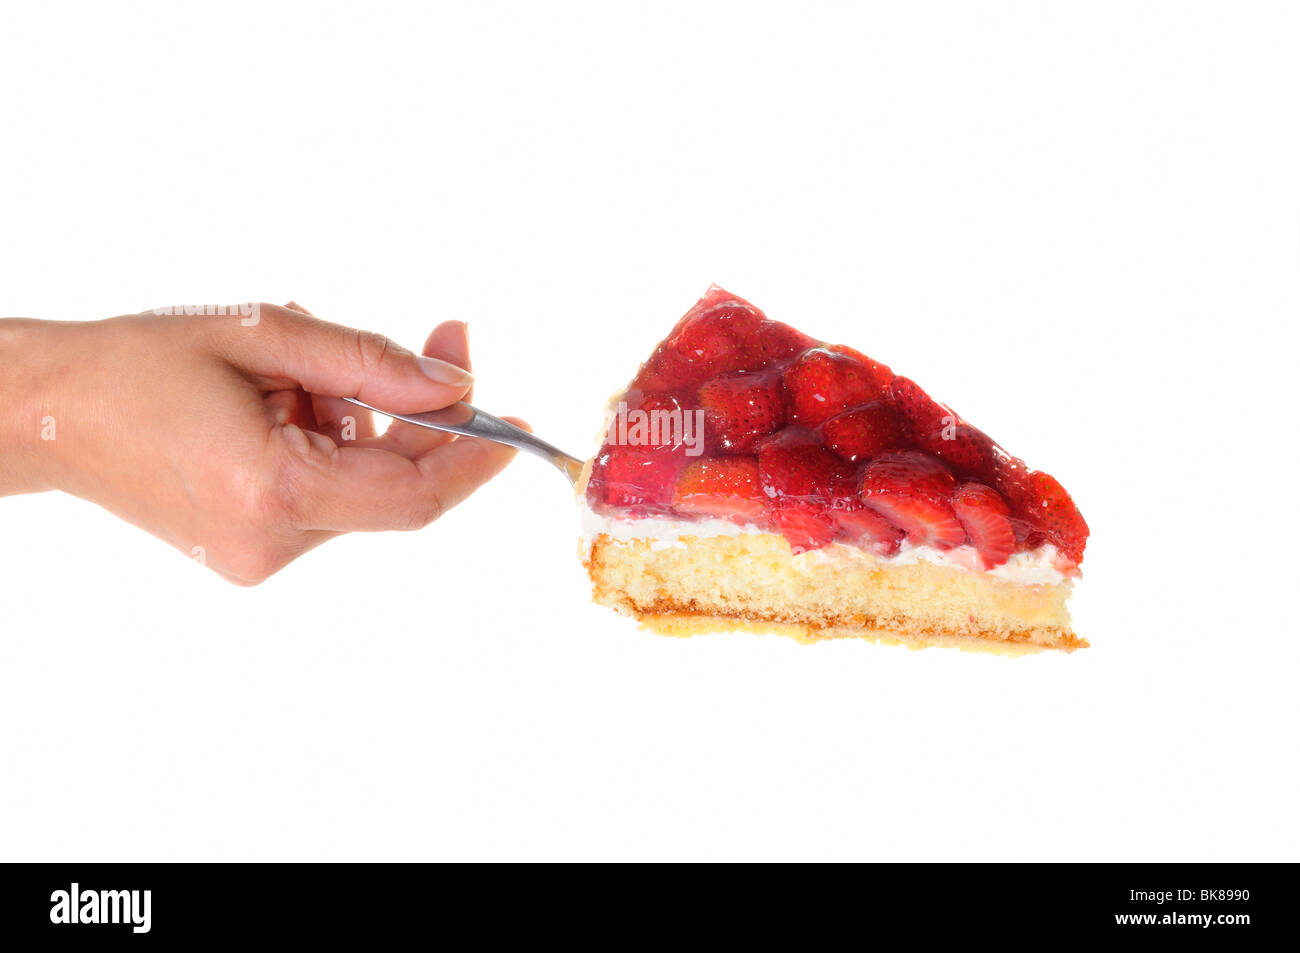 Woman's hand serving a piece of strawberry cake on a cake server Stock Photo